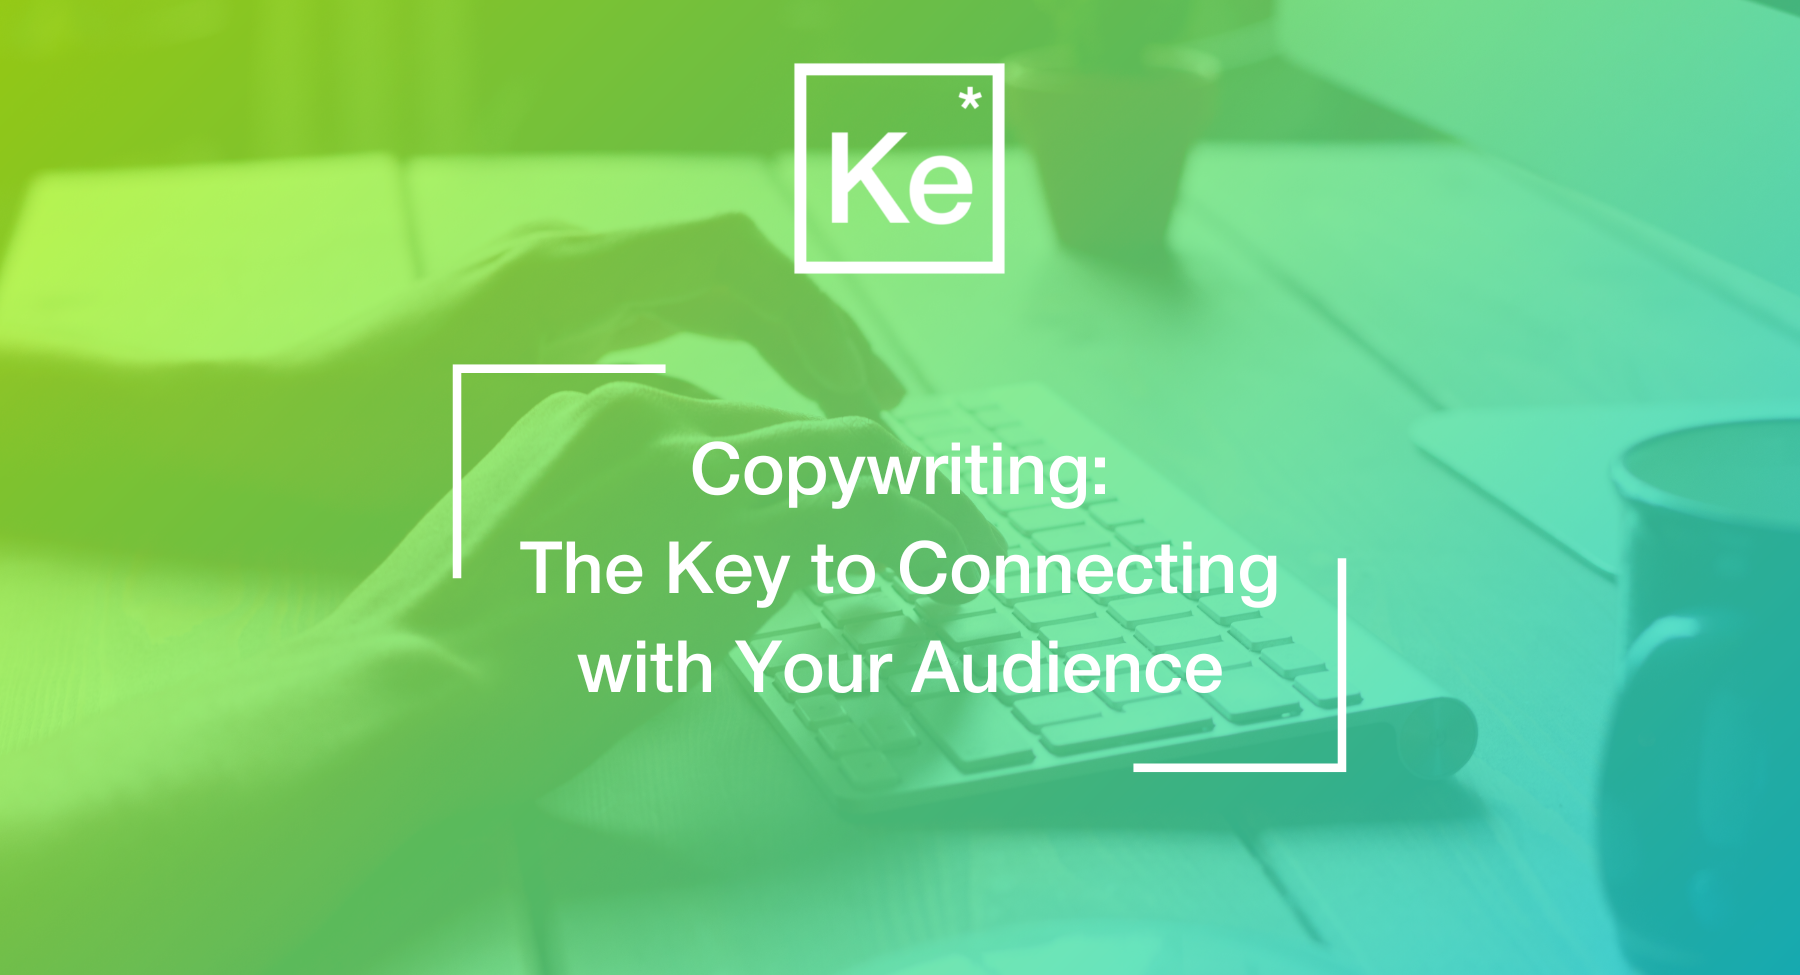 Copywriting: The Key to Connecting With Your Audience